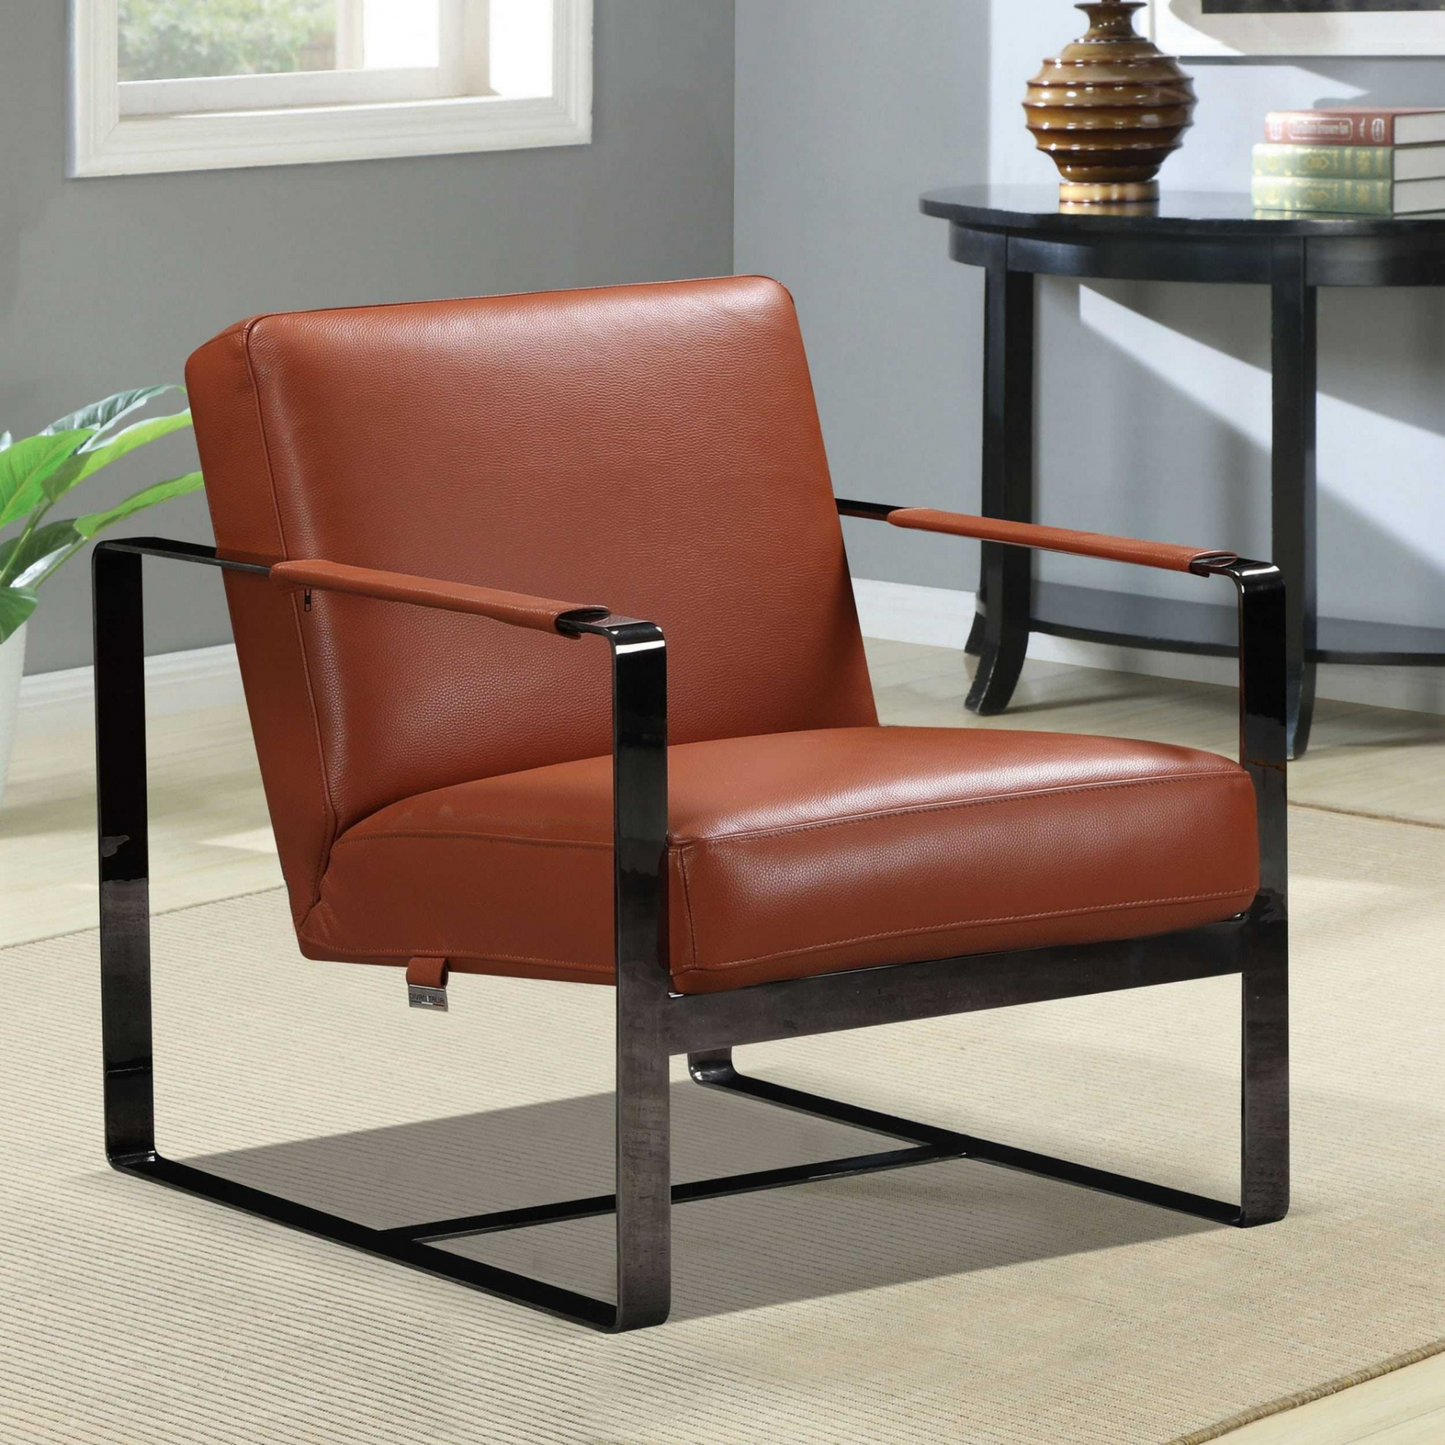 sleek chair with black metal frame and camel leather